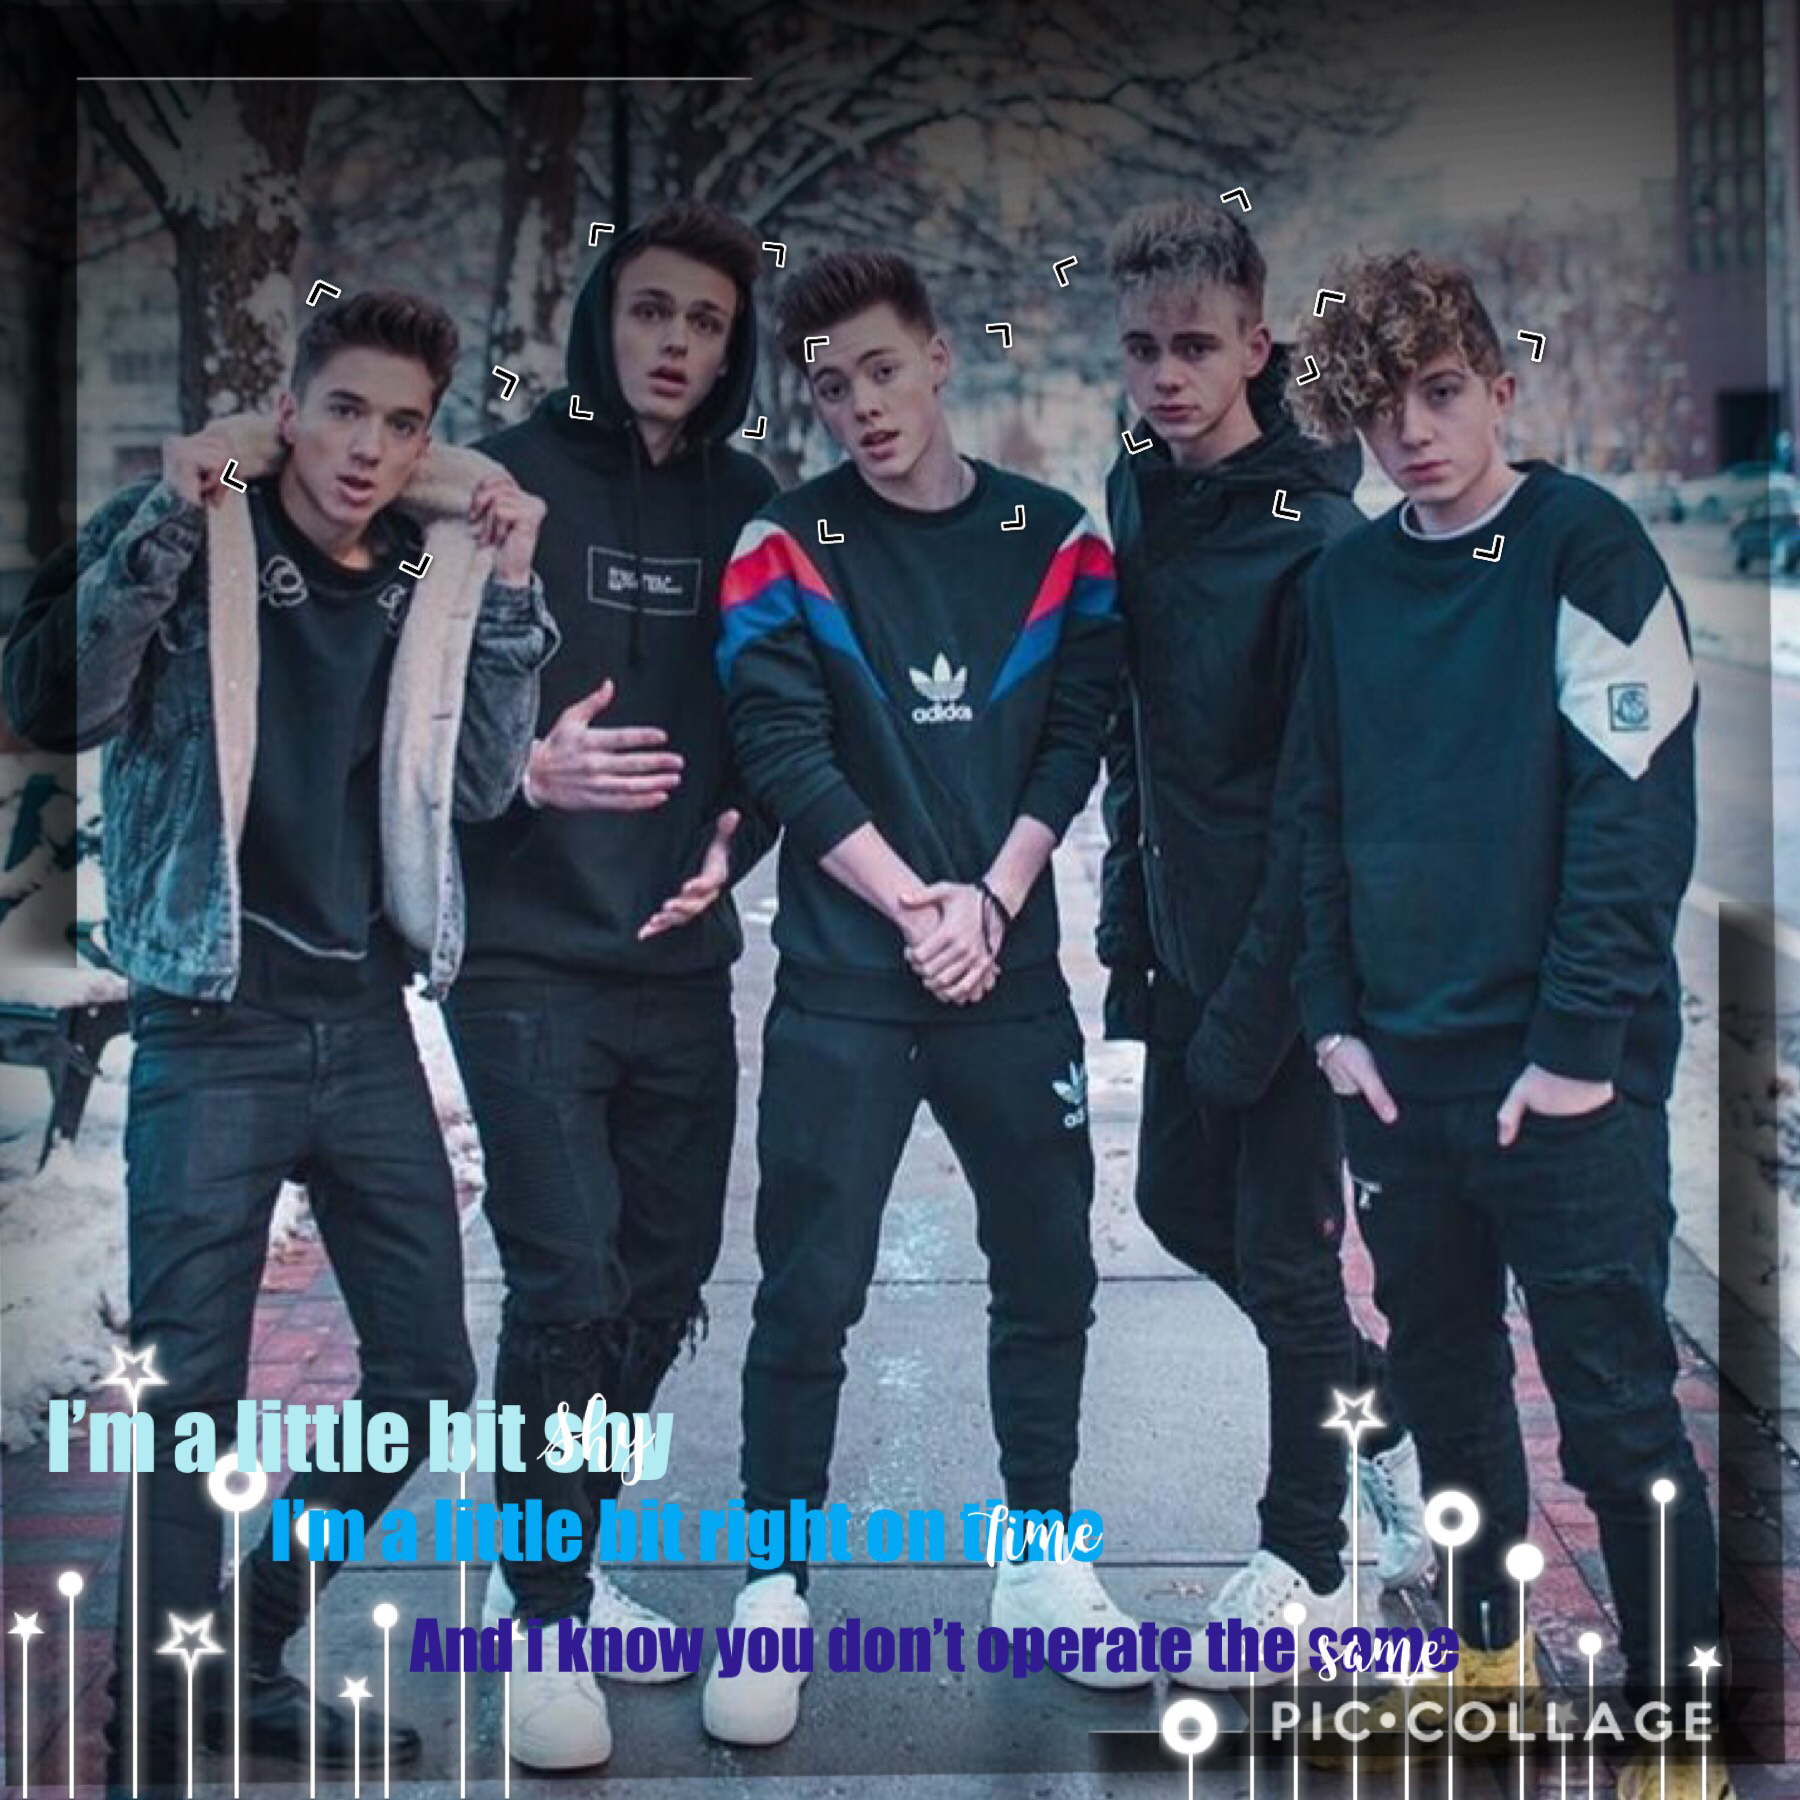 🥶Tappers🥶


Listen to WHY DONT WE’S new song “cold in l.a.” nowww it’s so good😂💙🥶